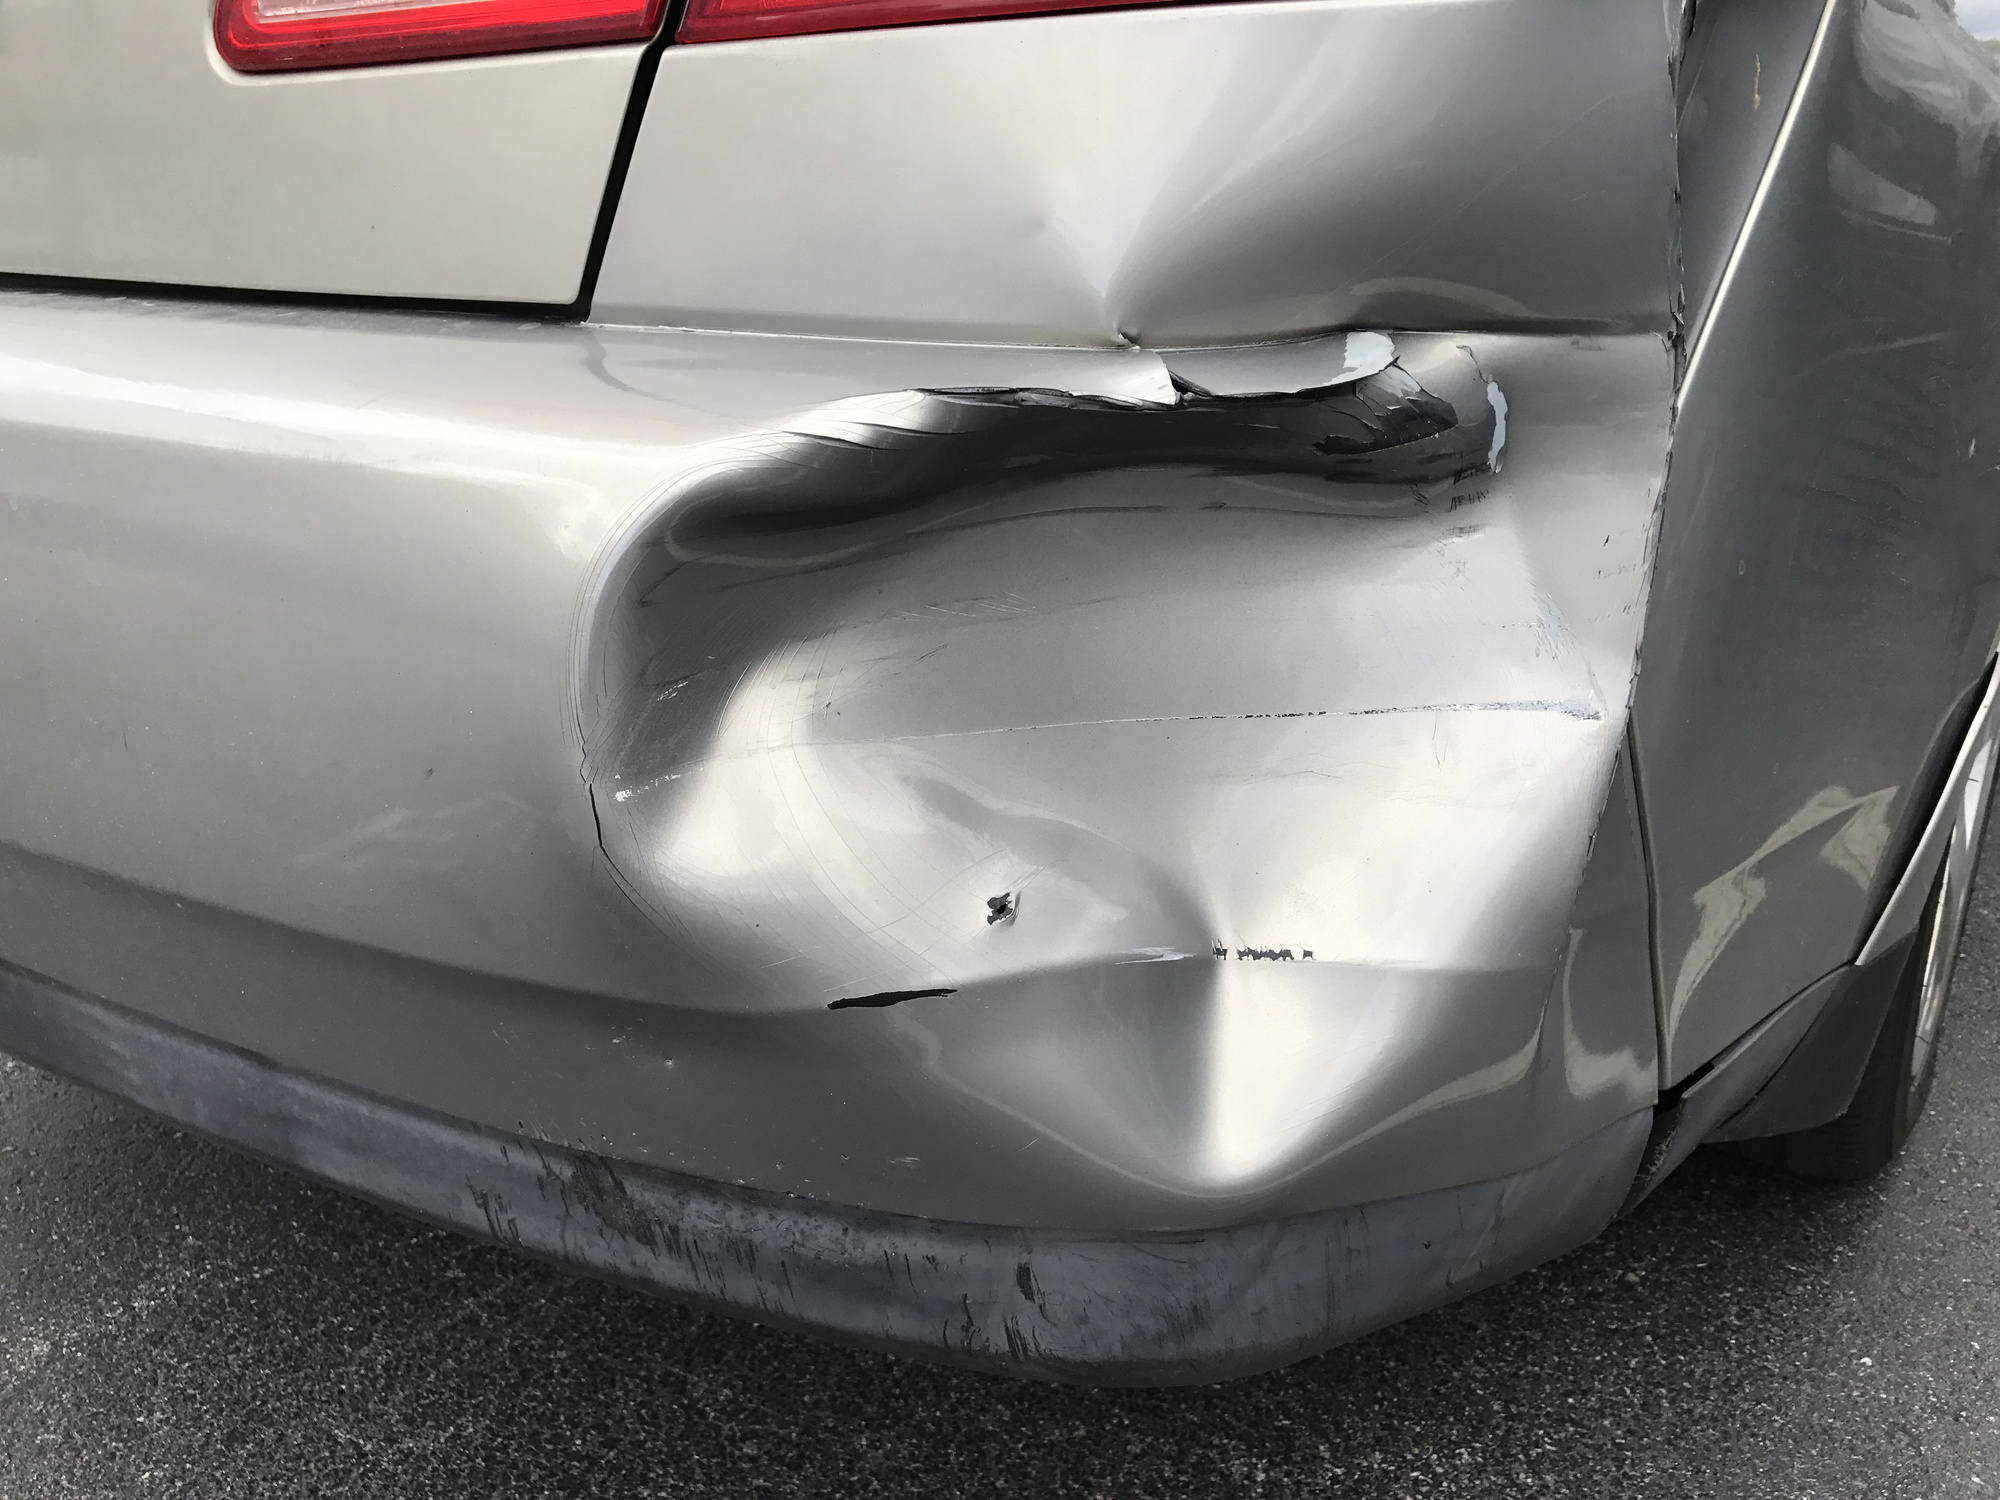 dent damage repair removal cosmetic tips help diy driving major bumper methods harmful vehicle think than why spend fact each